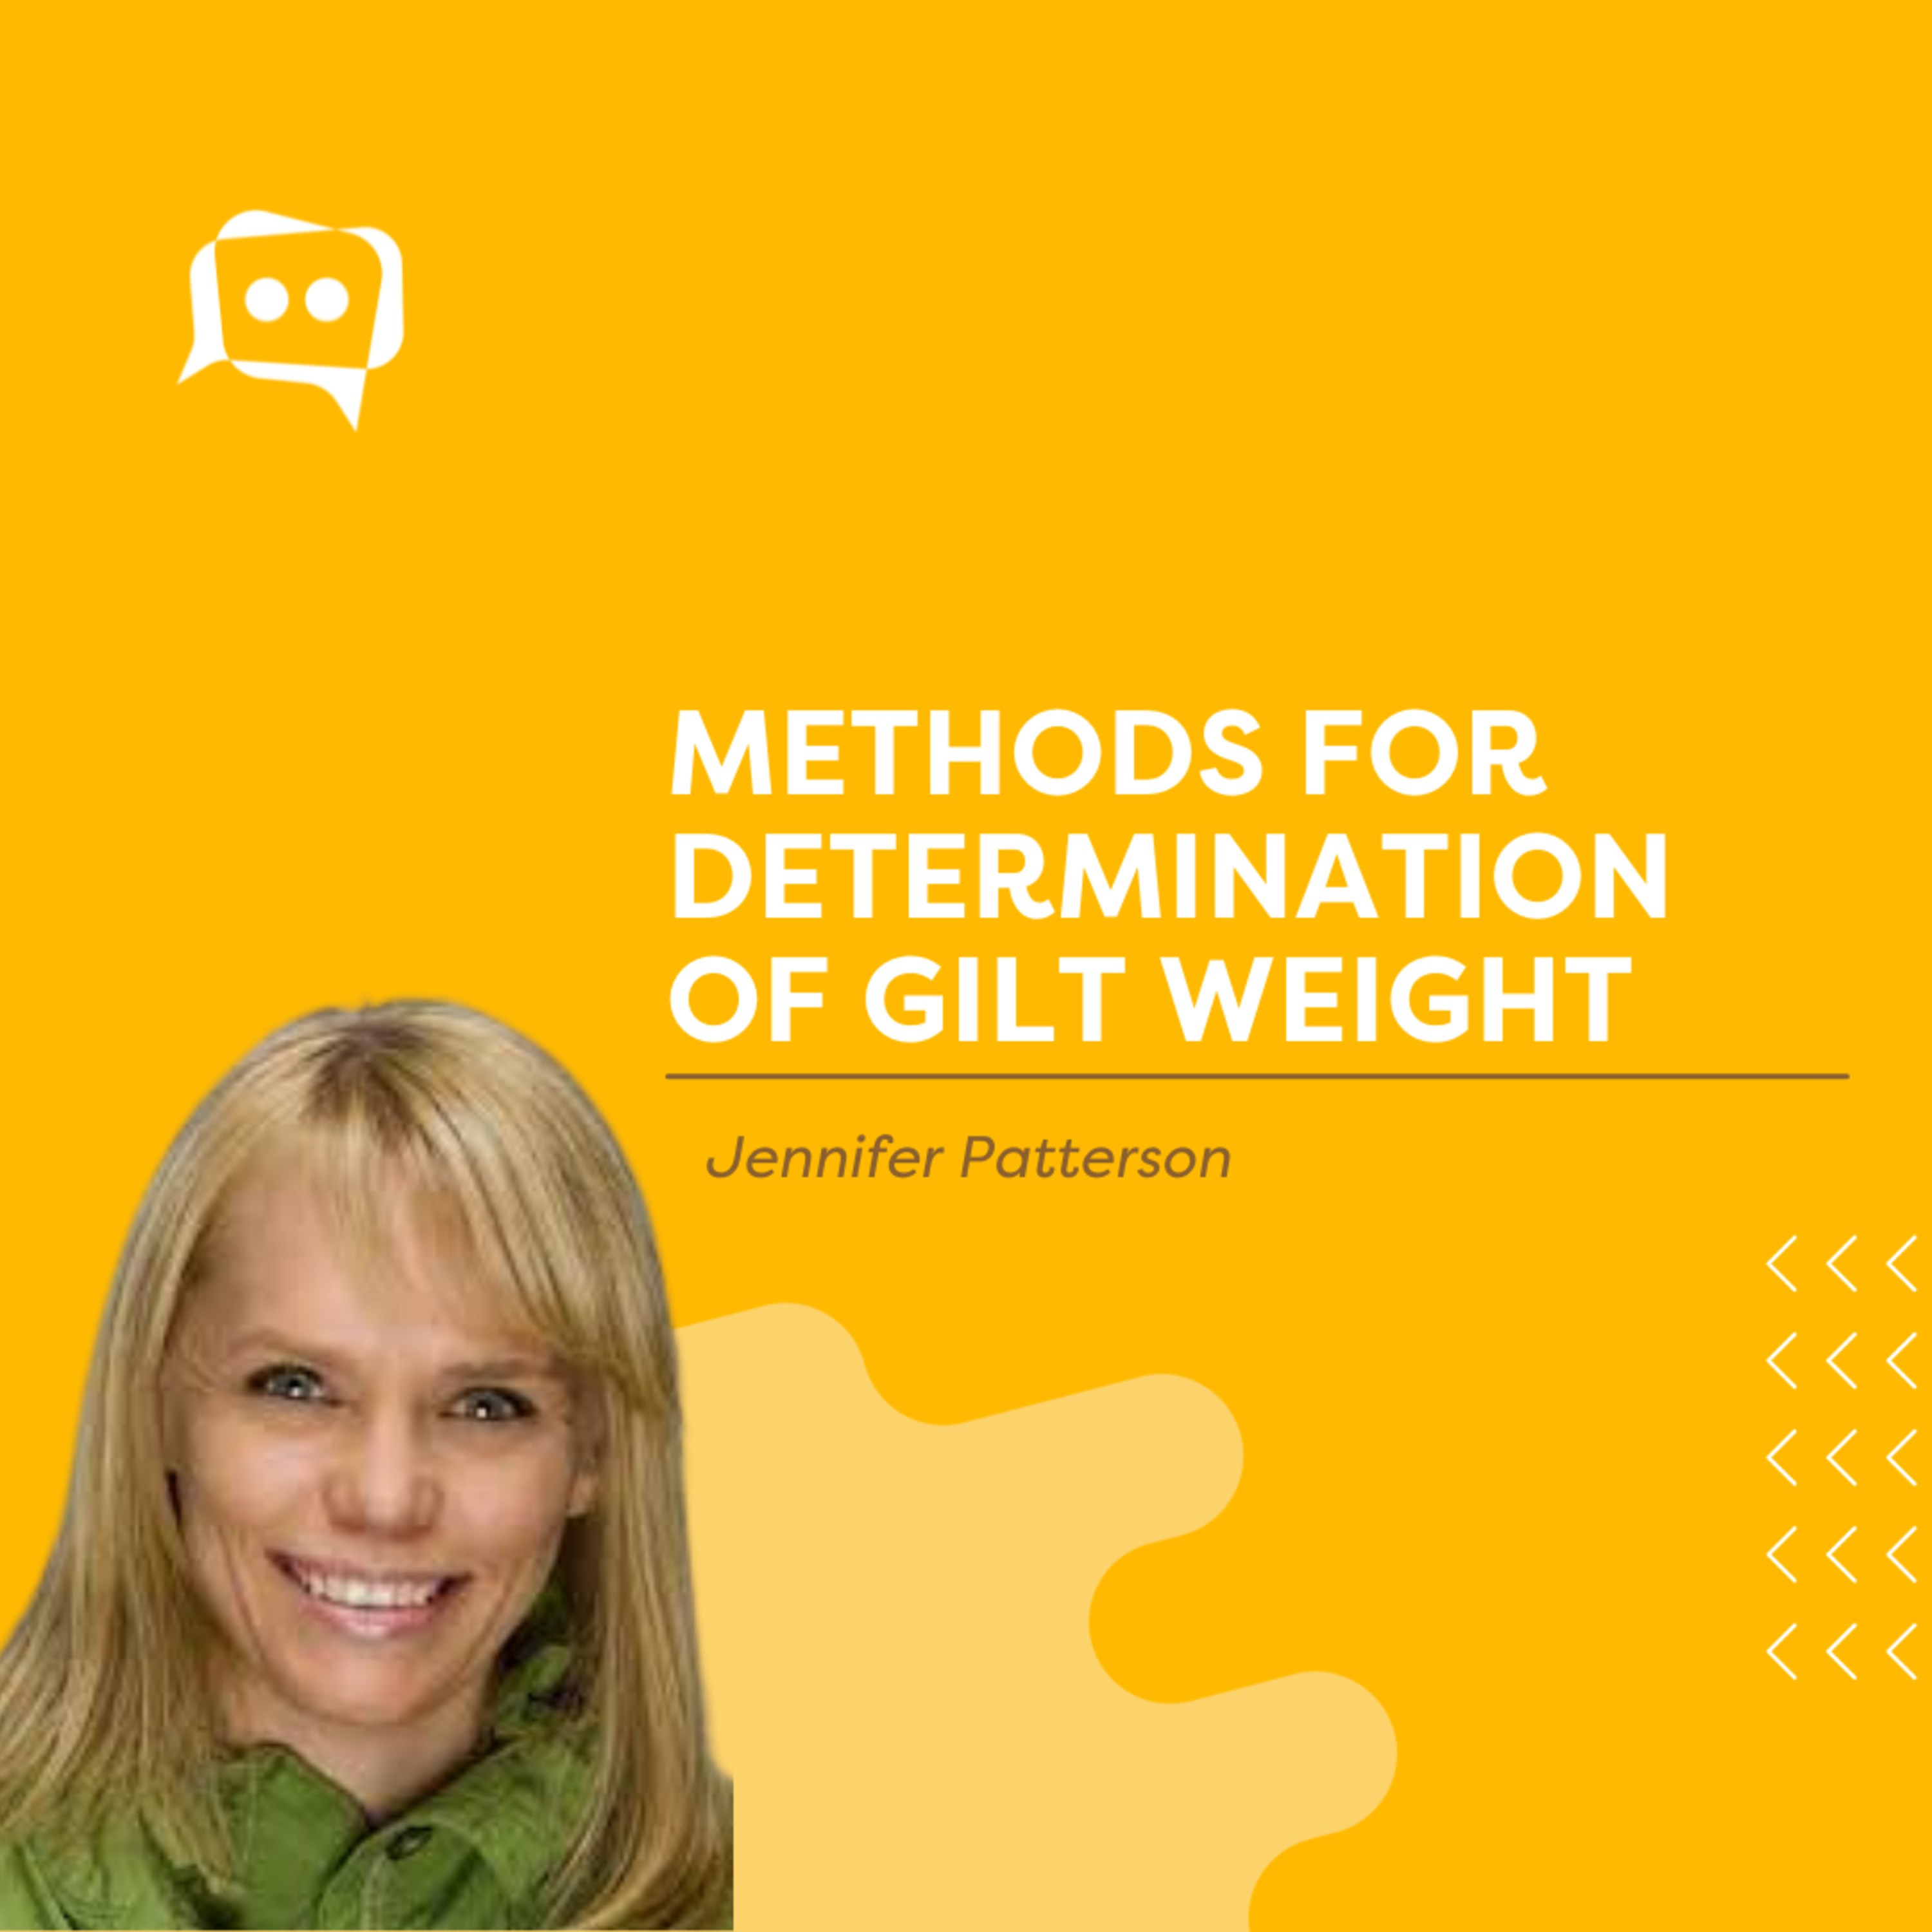 #SHORTS: Methods for determination of gilt weight, with Jennifer Patterson